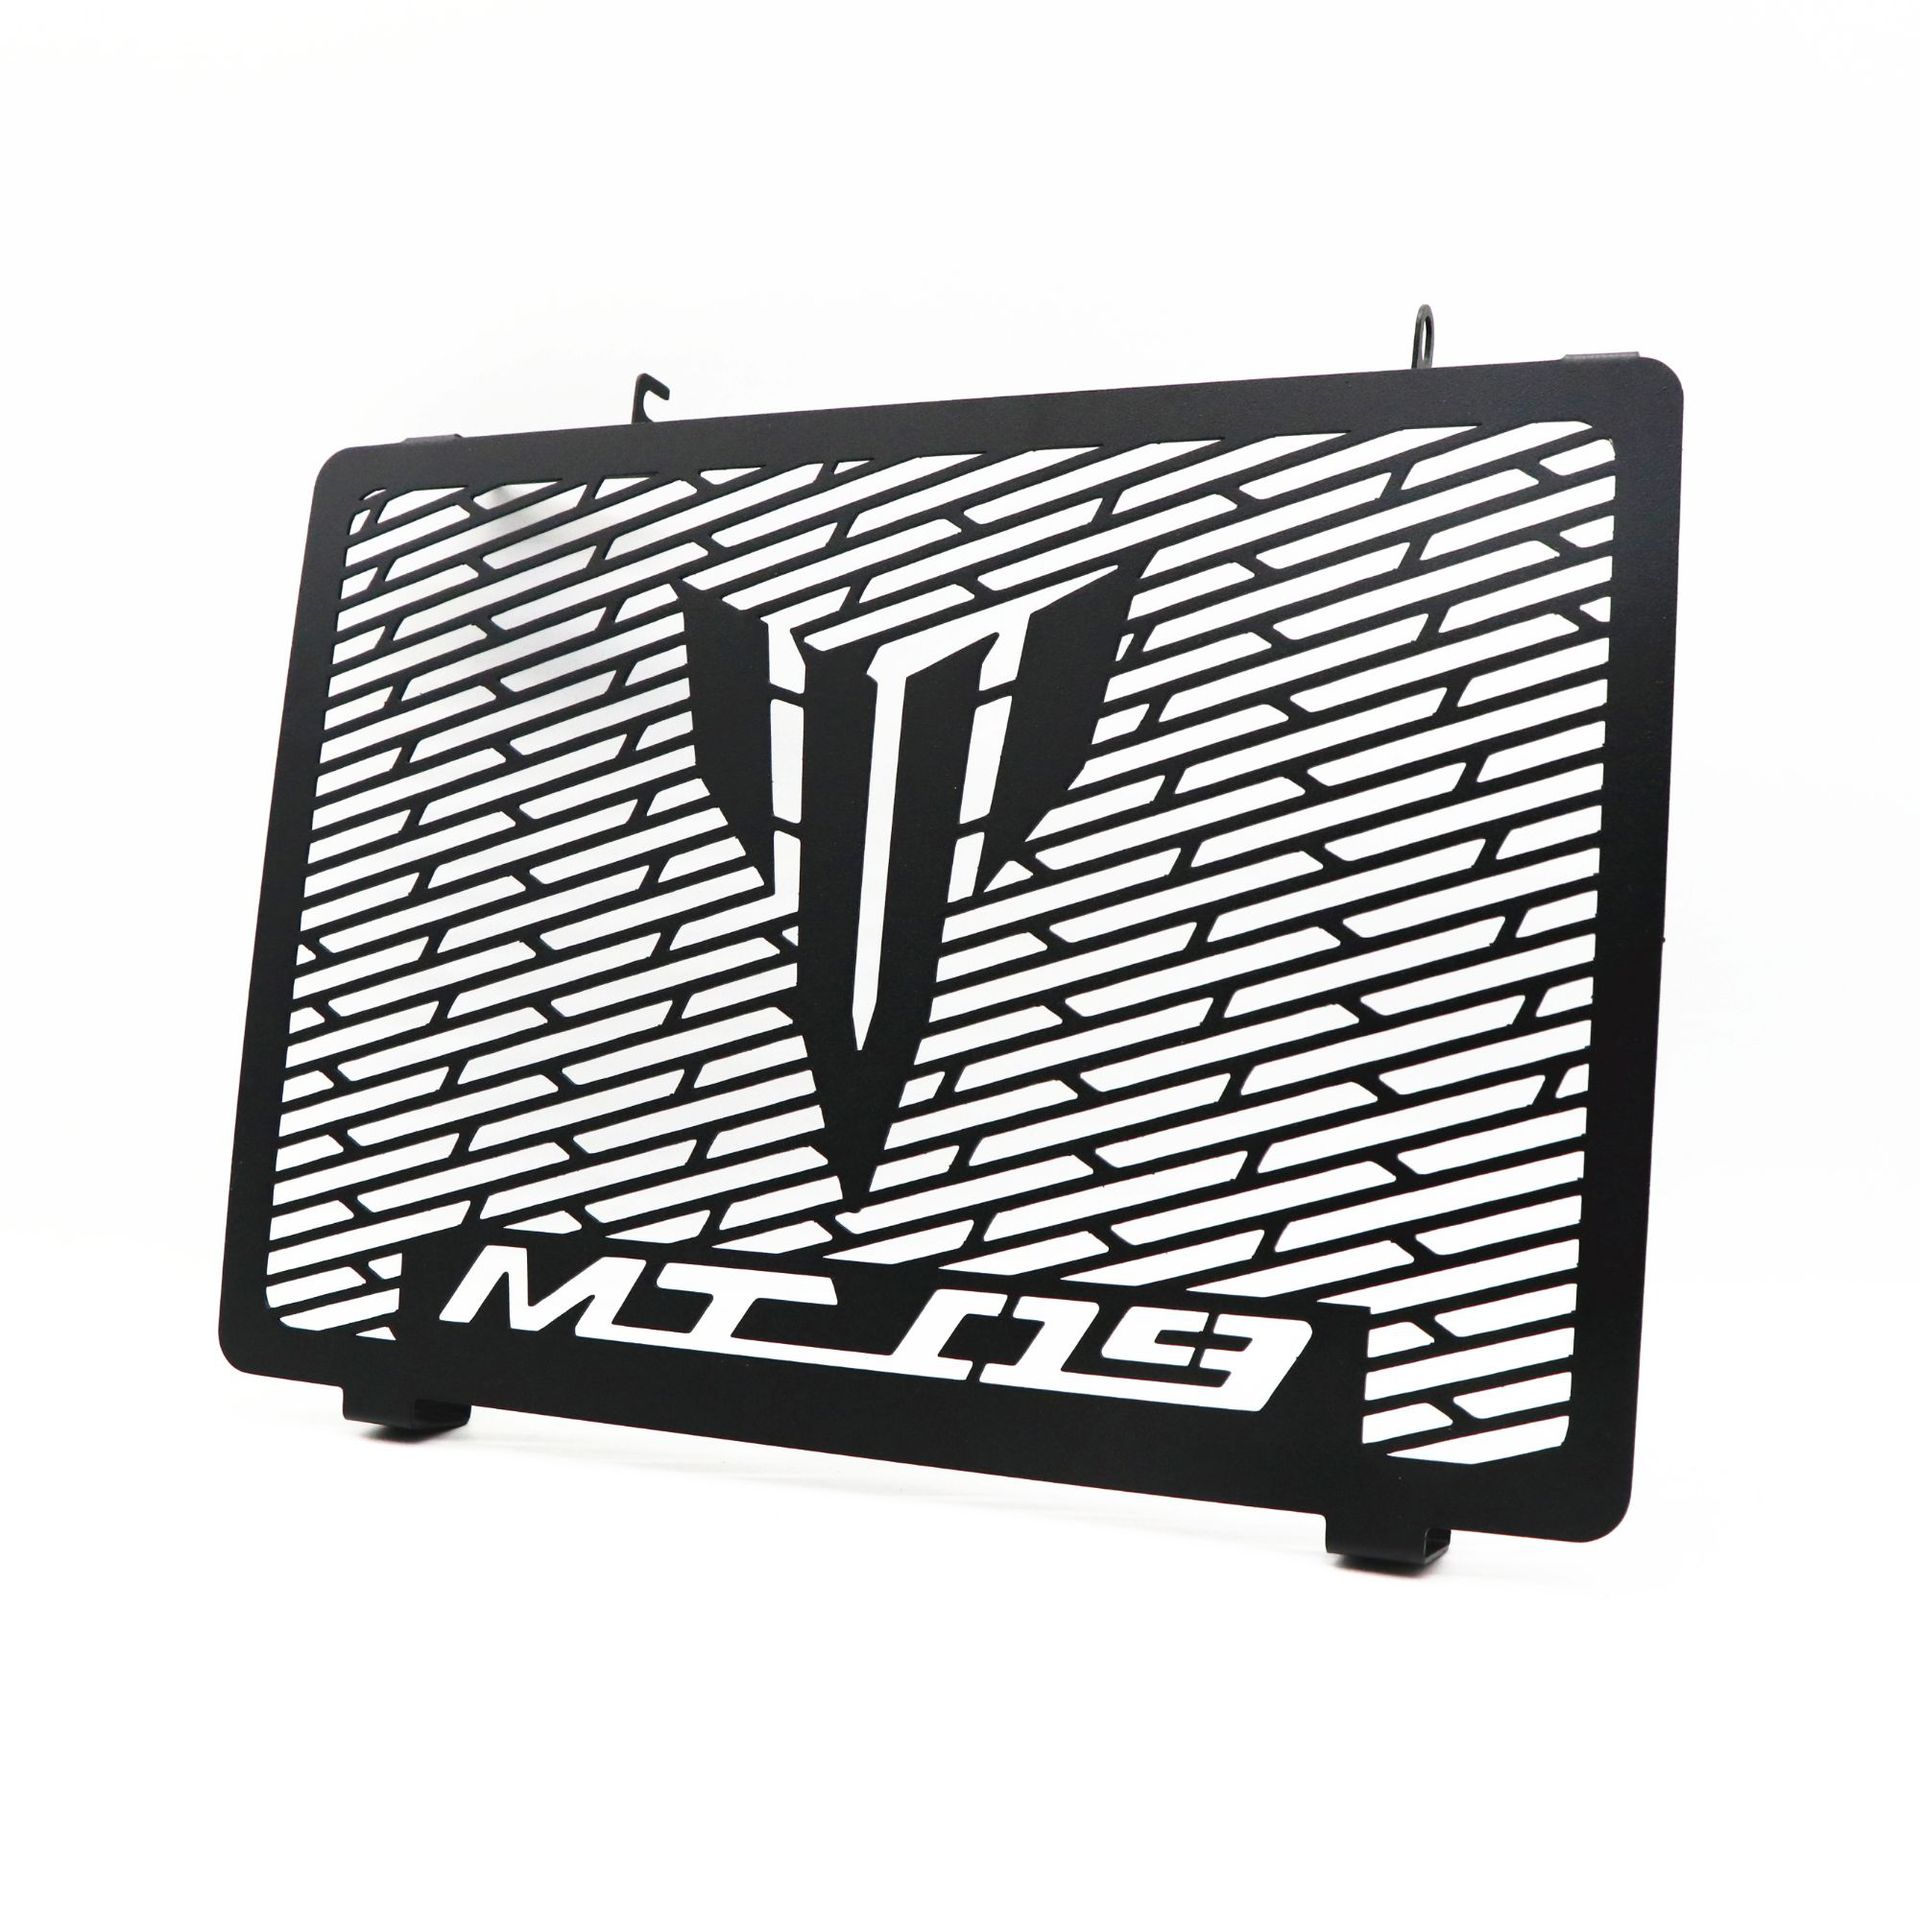 Stainless Steel Motorcycle Radiator Guard Radiator Cover Fits For Yamaha MT-09 MT09 14-17